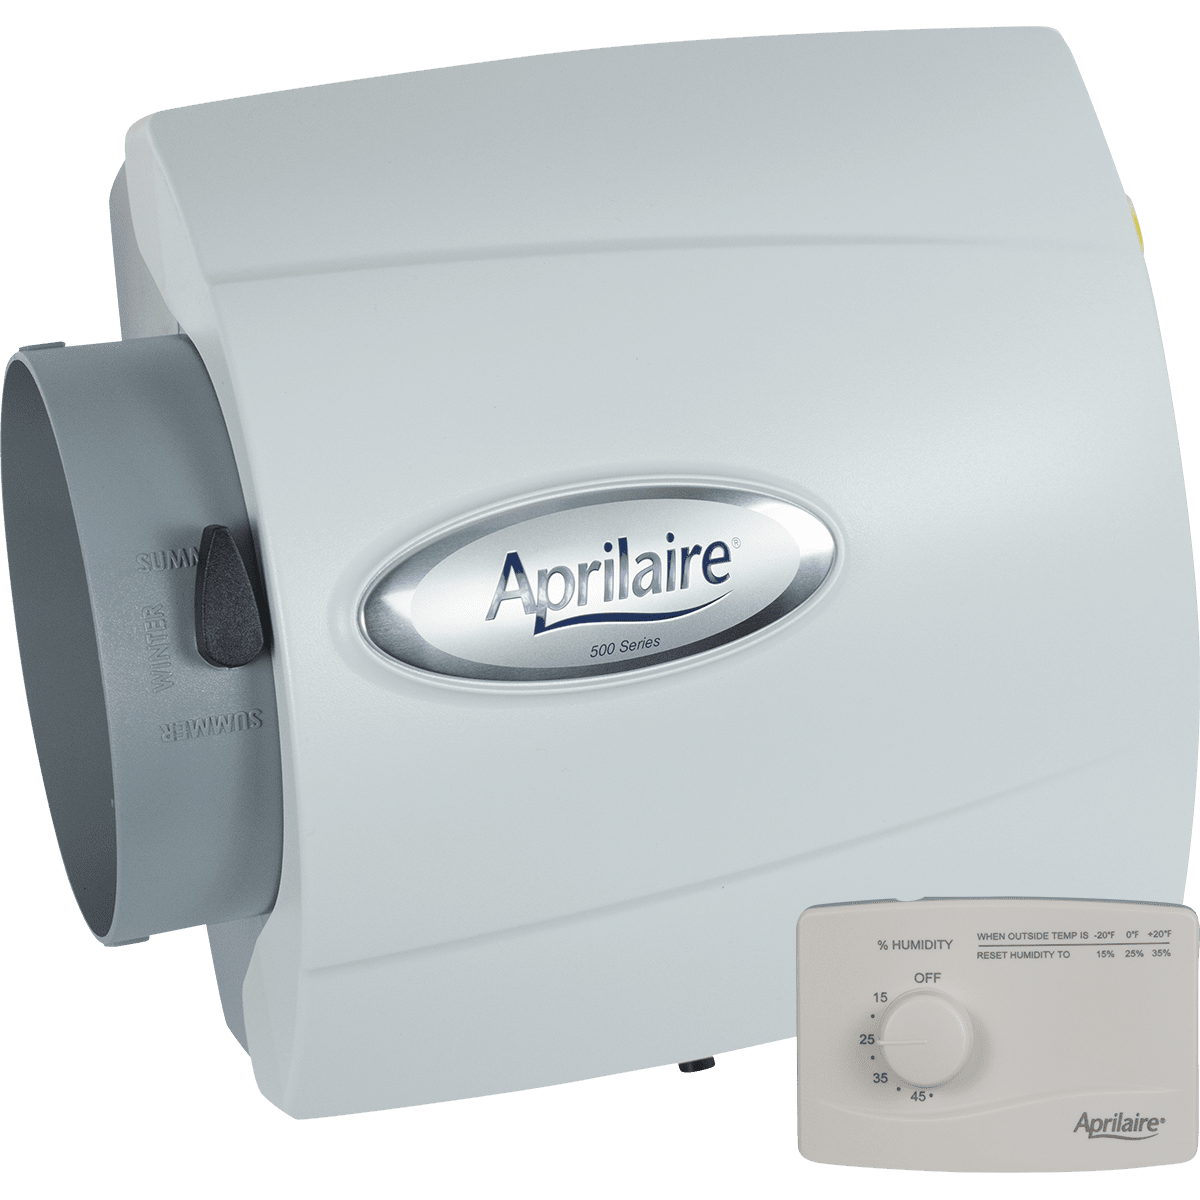 Aprilaire Model 500 Small Bypass Humidifiers - manual model - Primary View